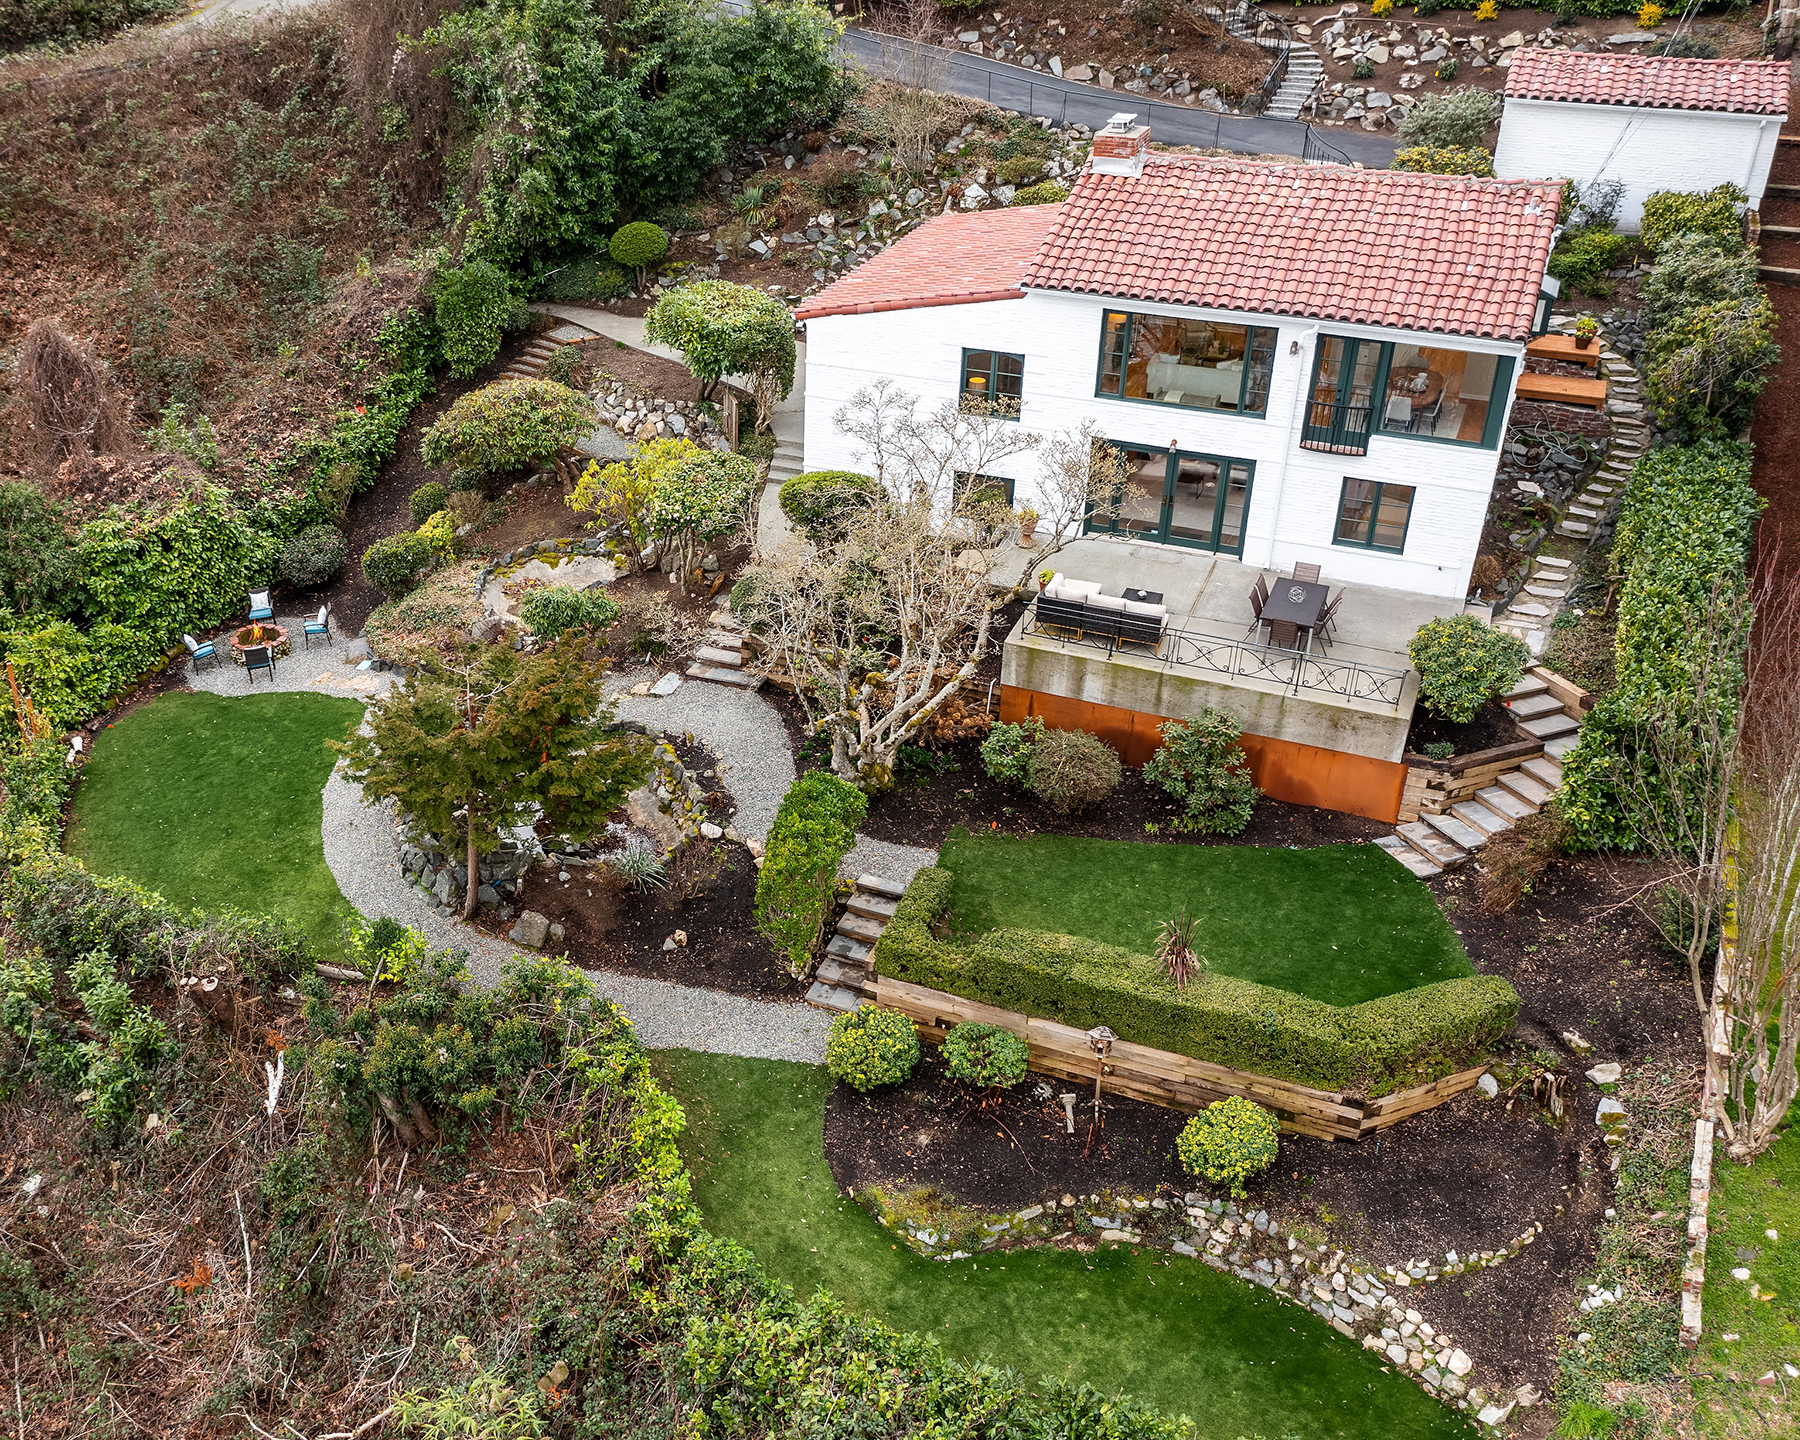 This 1930s Mediterranean villa with a view of Seattle’s Lake Union could be yours for .3M